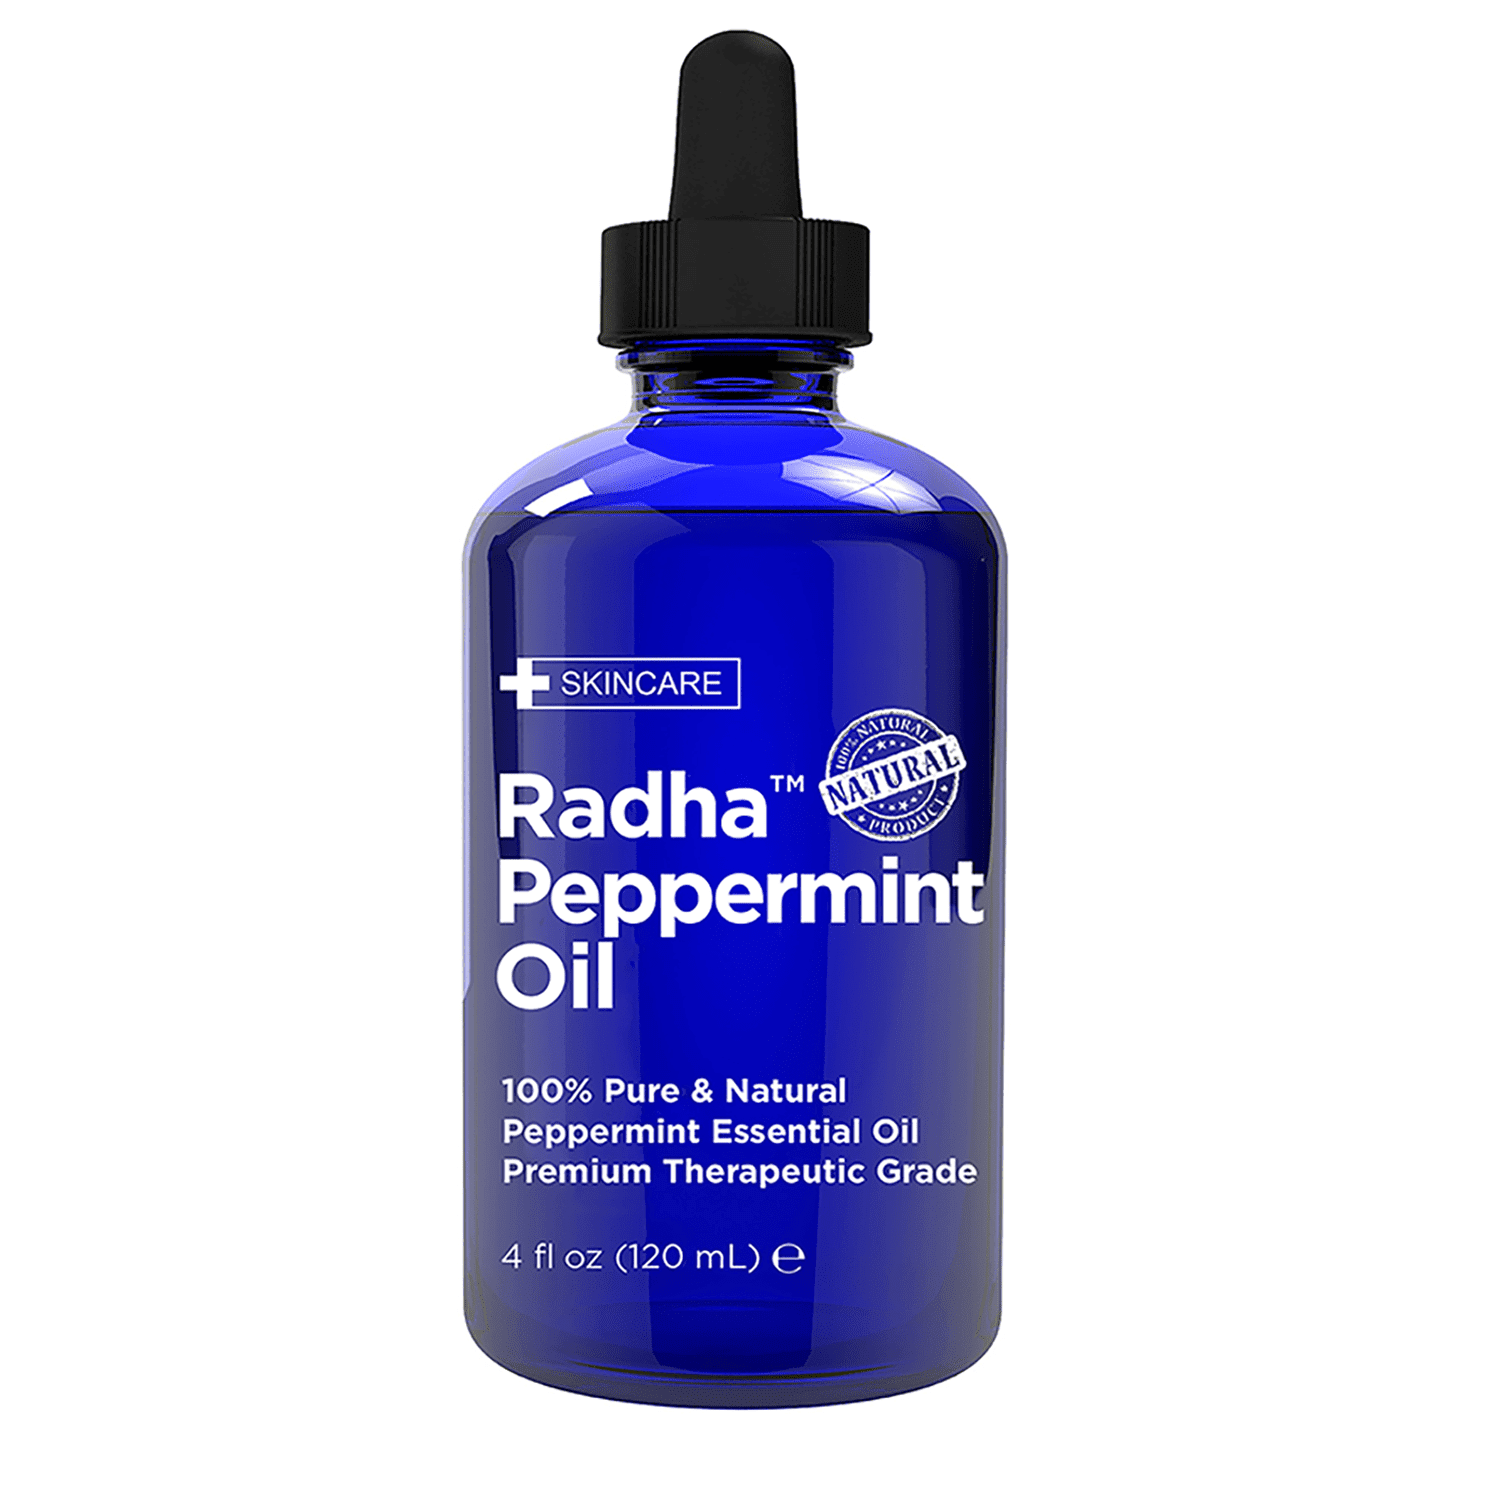 Radha Beauty Peppermint Essential Oil 4 oz - 100% Pure & Therapeutic Grade, Steam Distilled for Aromatherapy, Fresh Minty Scent, Mental Focus, Headaches, Congestion…